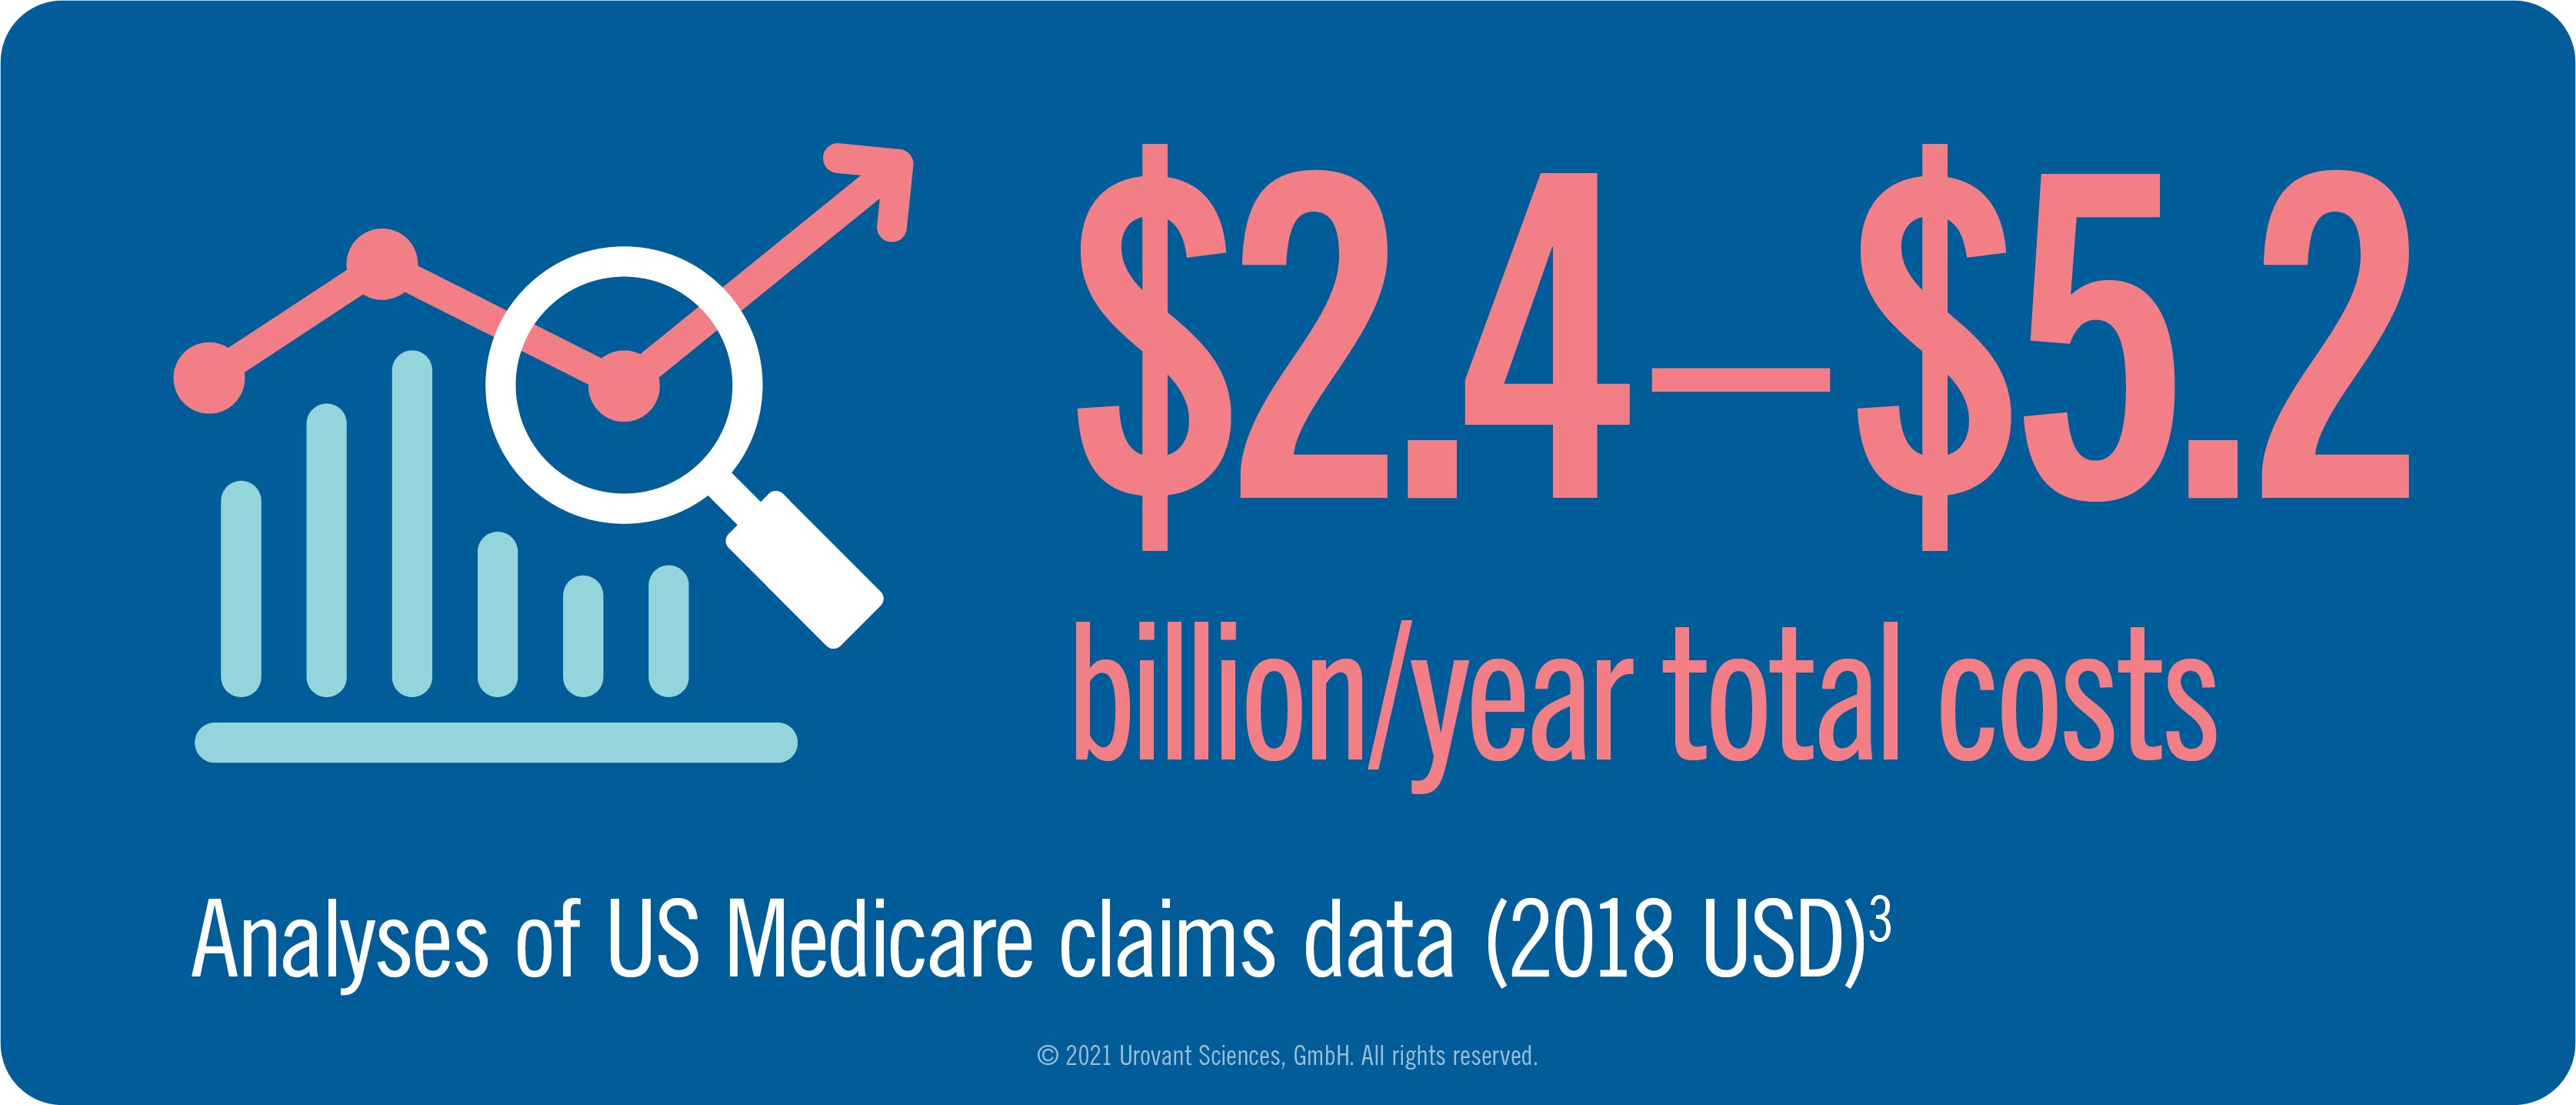 Infographic of total healthcare dollar cost per year for overactive bladder based on U.S. Medicare claims data